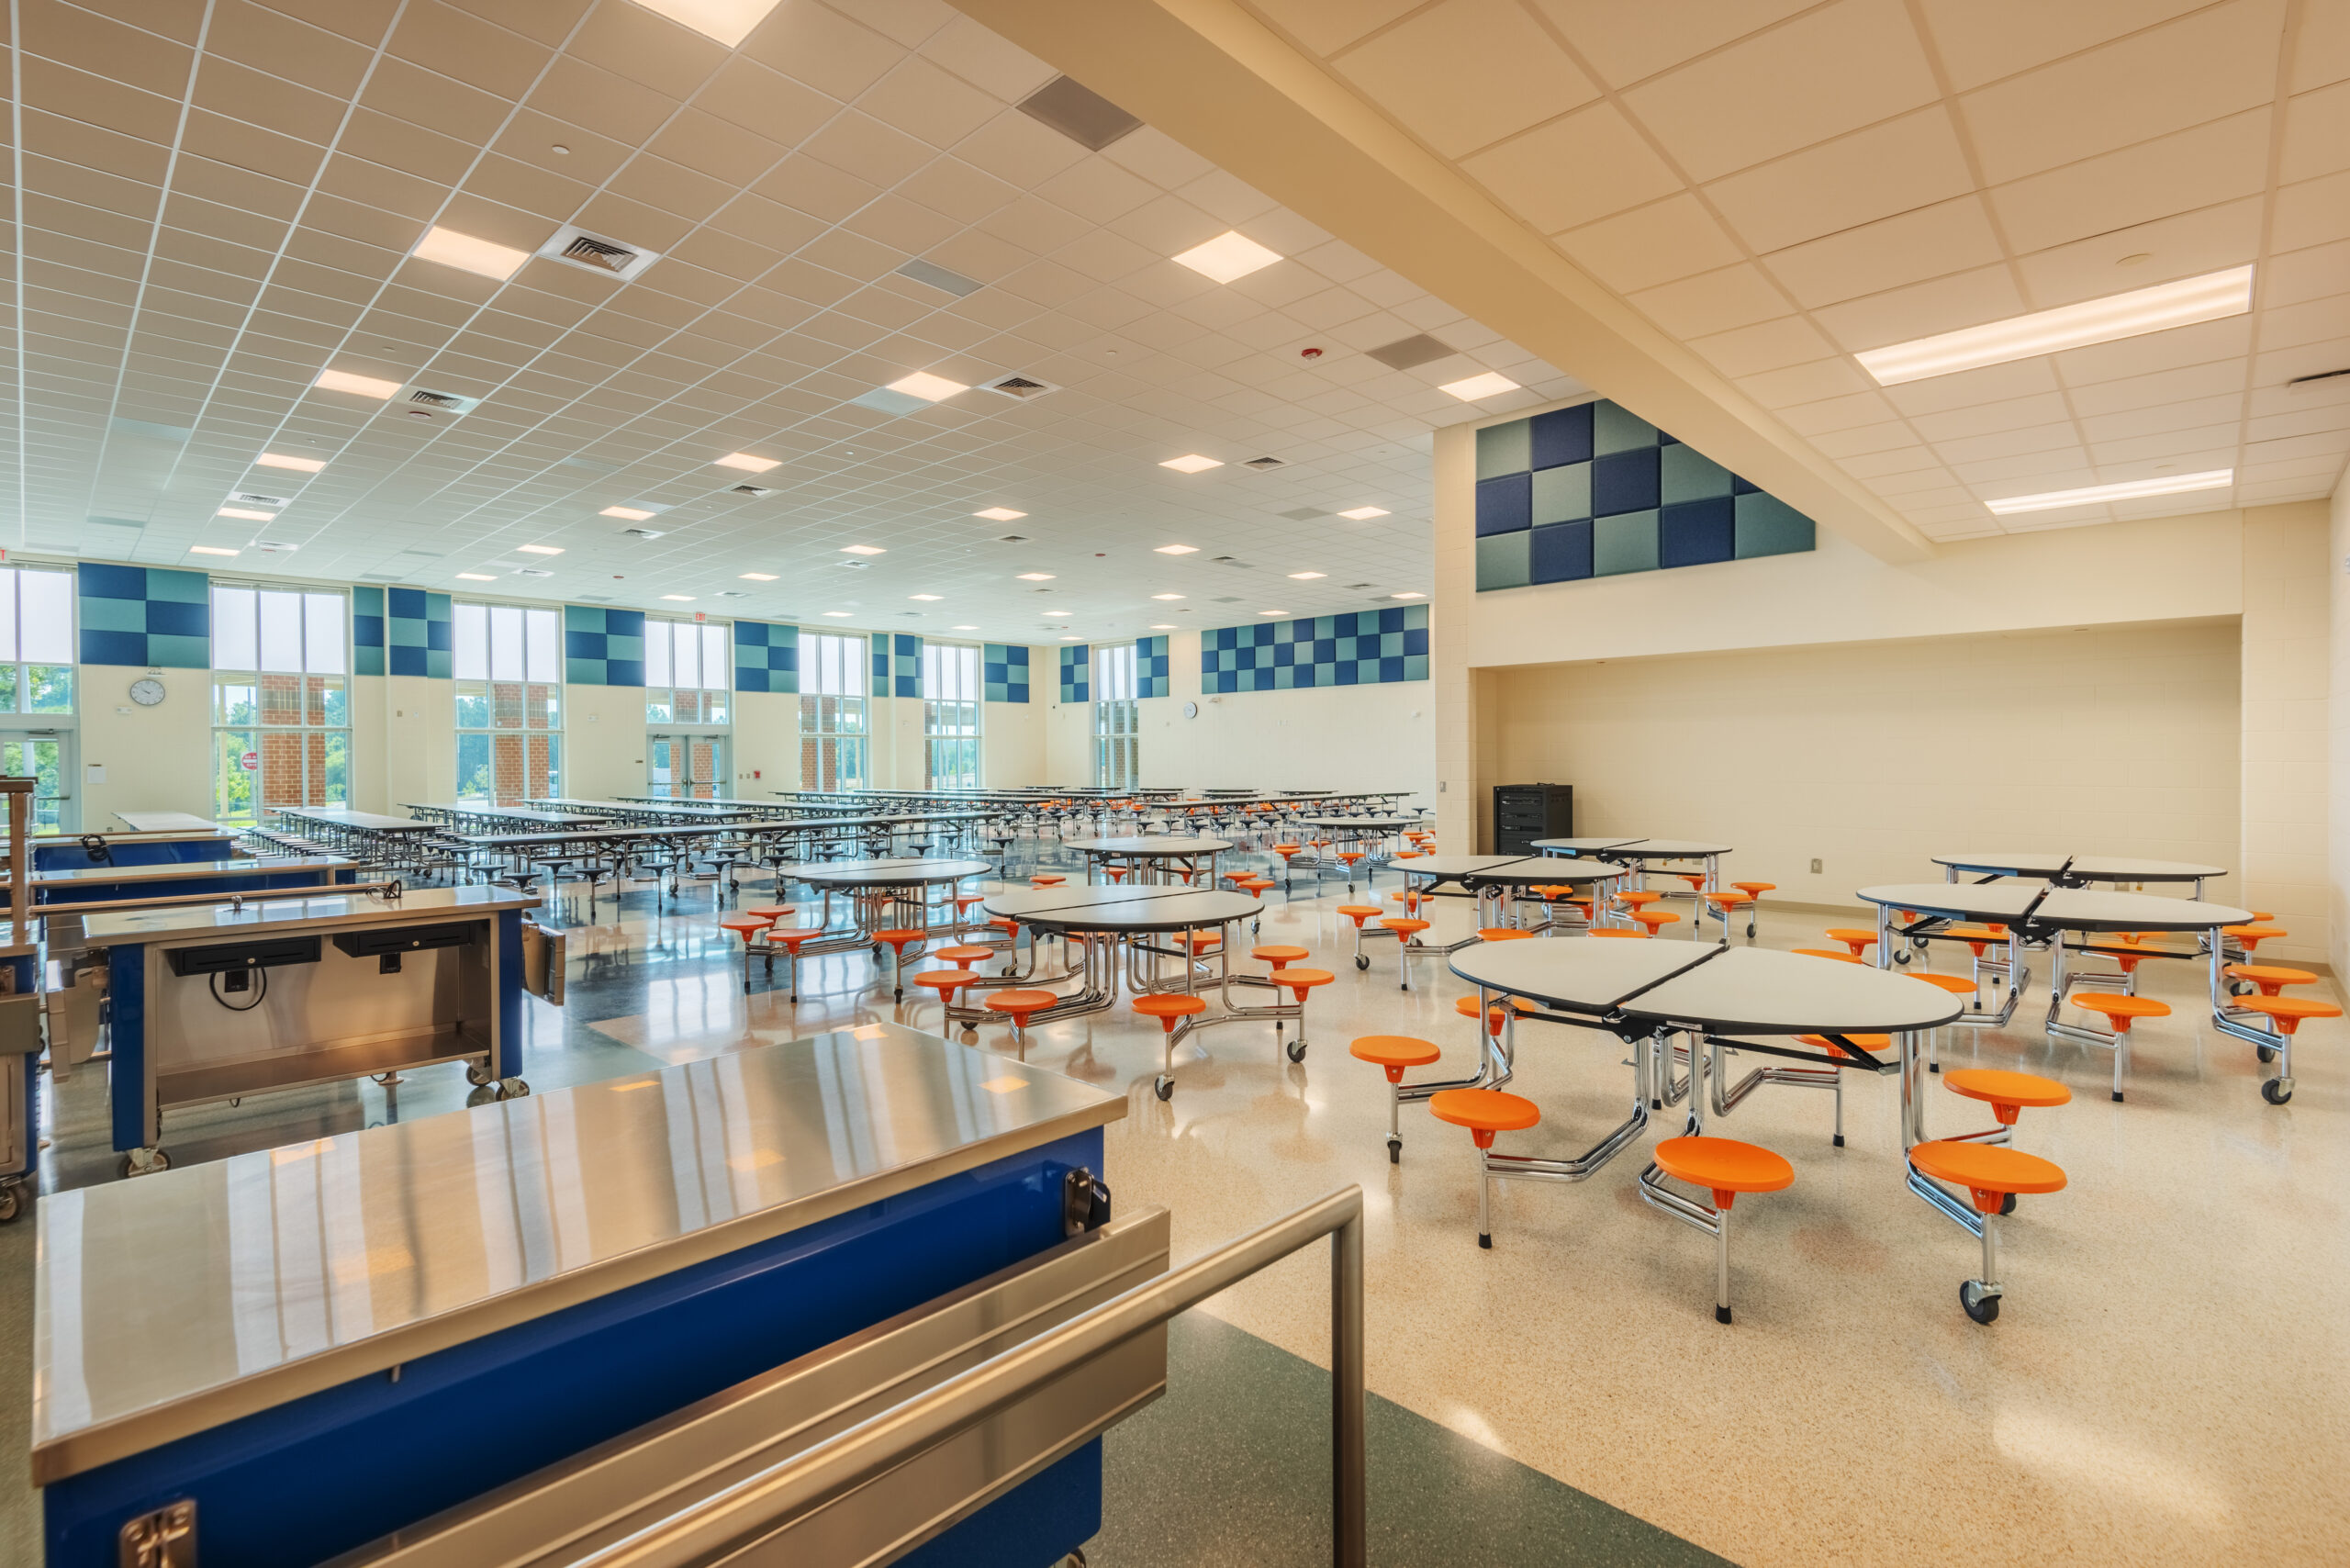 Neuse River Middle School Cafeteria with Dining Tables and Serving Lines